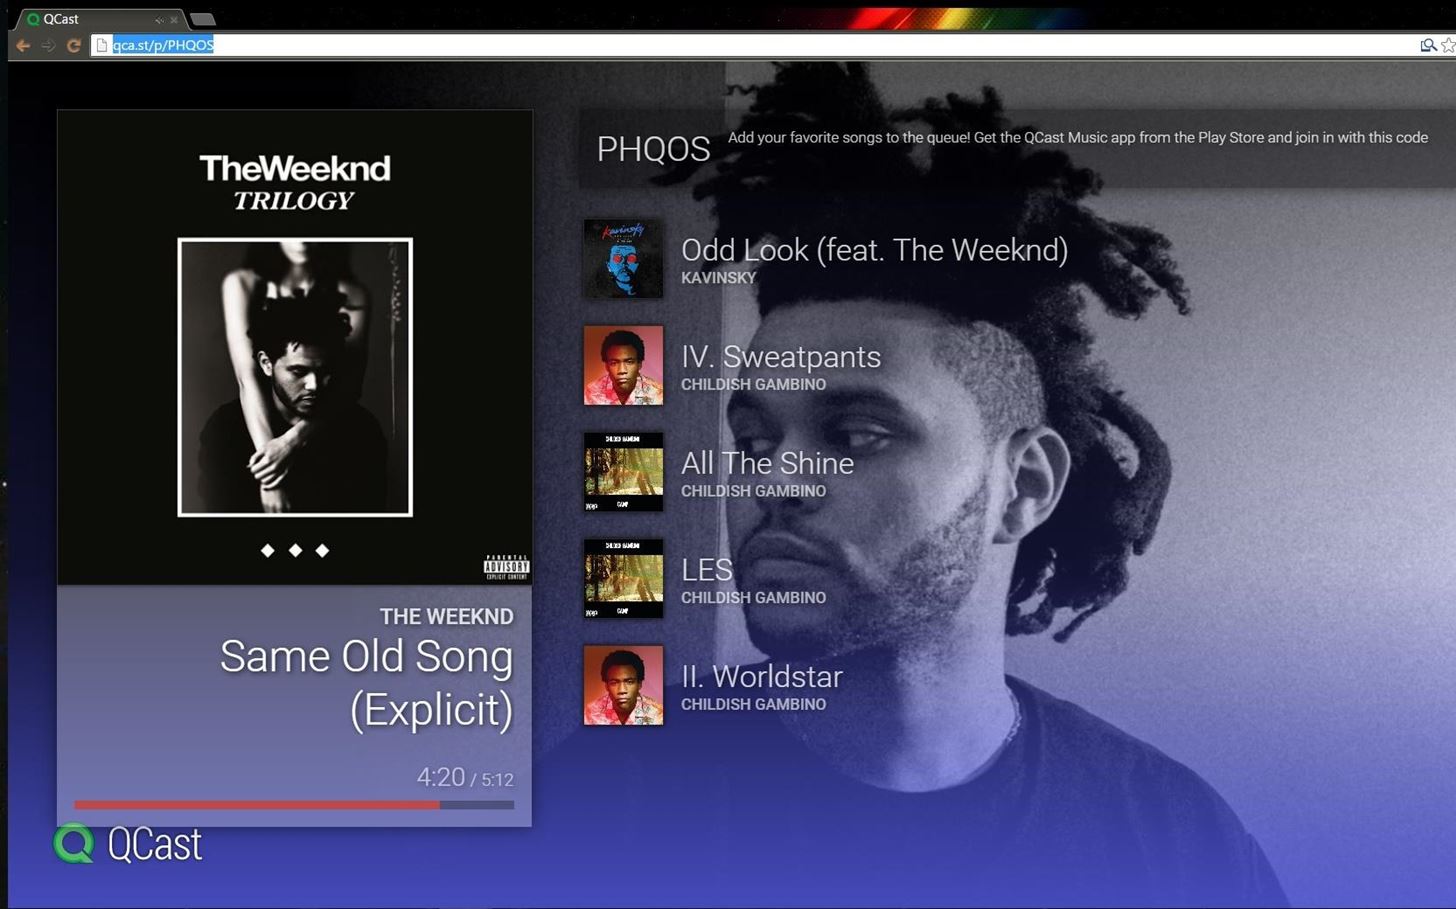 How to Stream Spotify Music to Chromecast from Your Android or iPhone